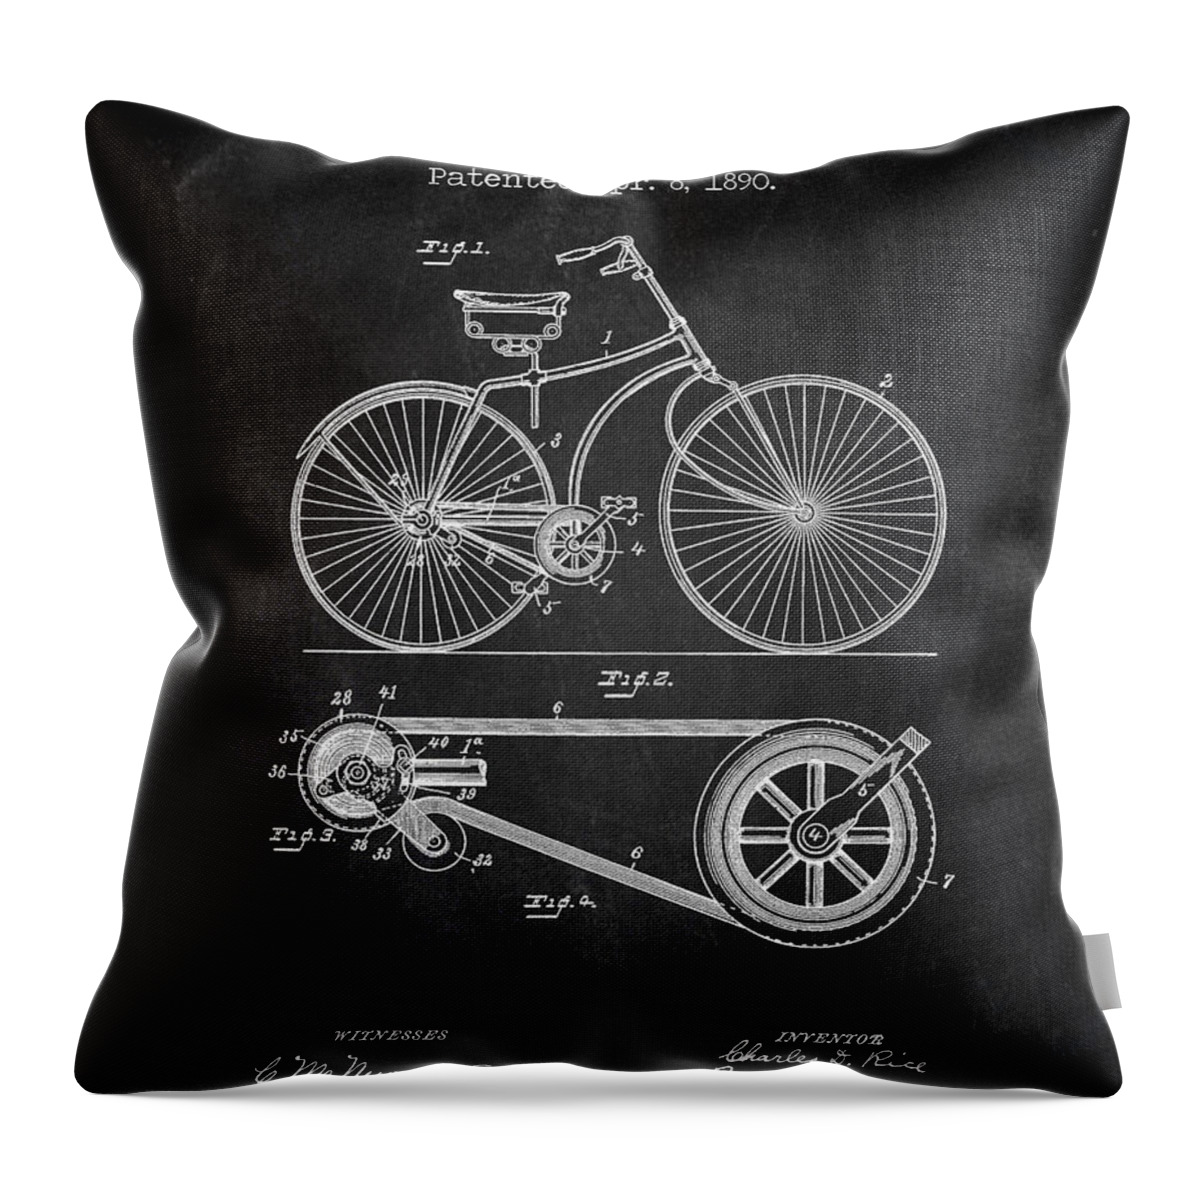 Bicycle Throw Pillow featuring the digital art Bicycle chalkboard patent by Dennson Creative